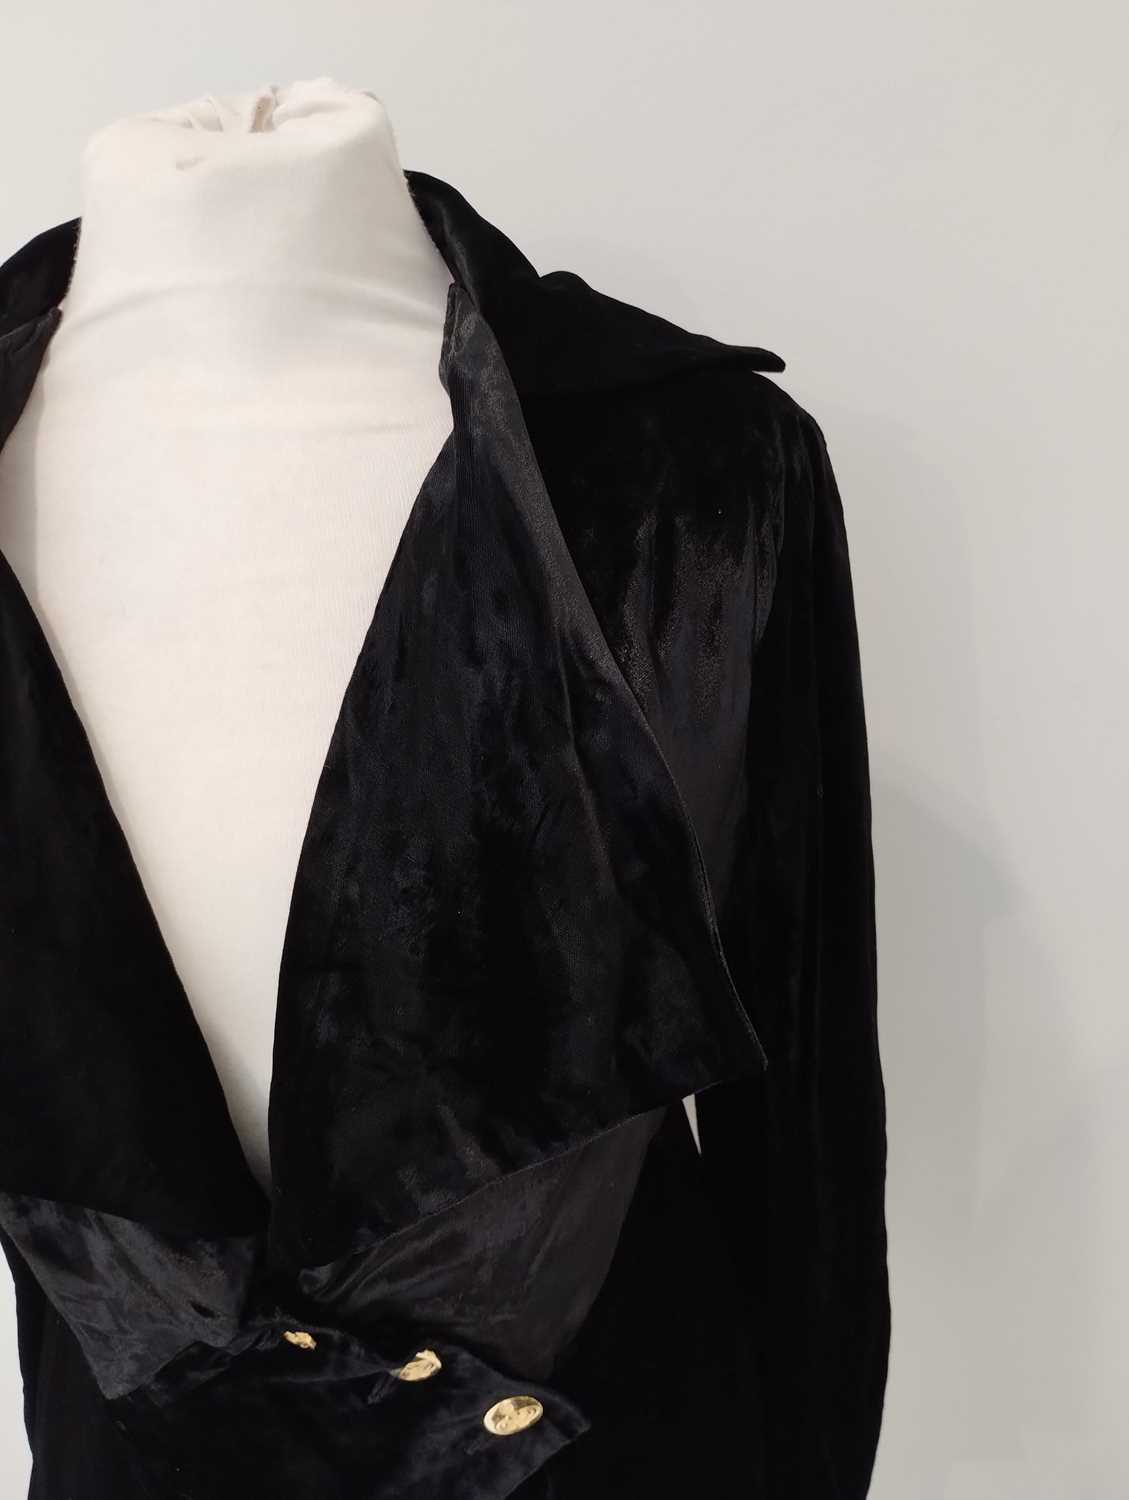 Vivienne Westwood London Black Pan Velvet Jacket, Spring/Summer Café Society Collection 1994 with - Image 15 of 27